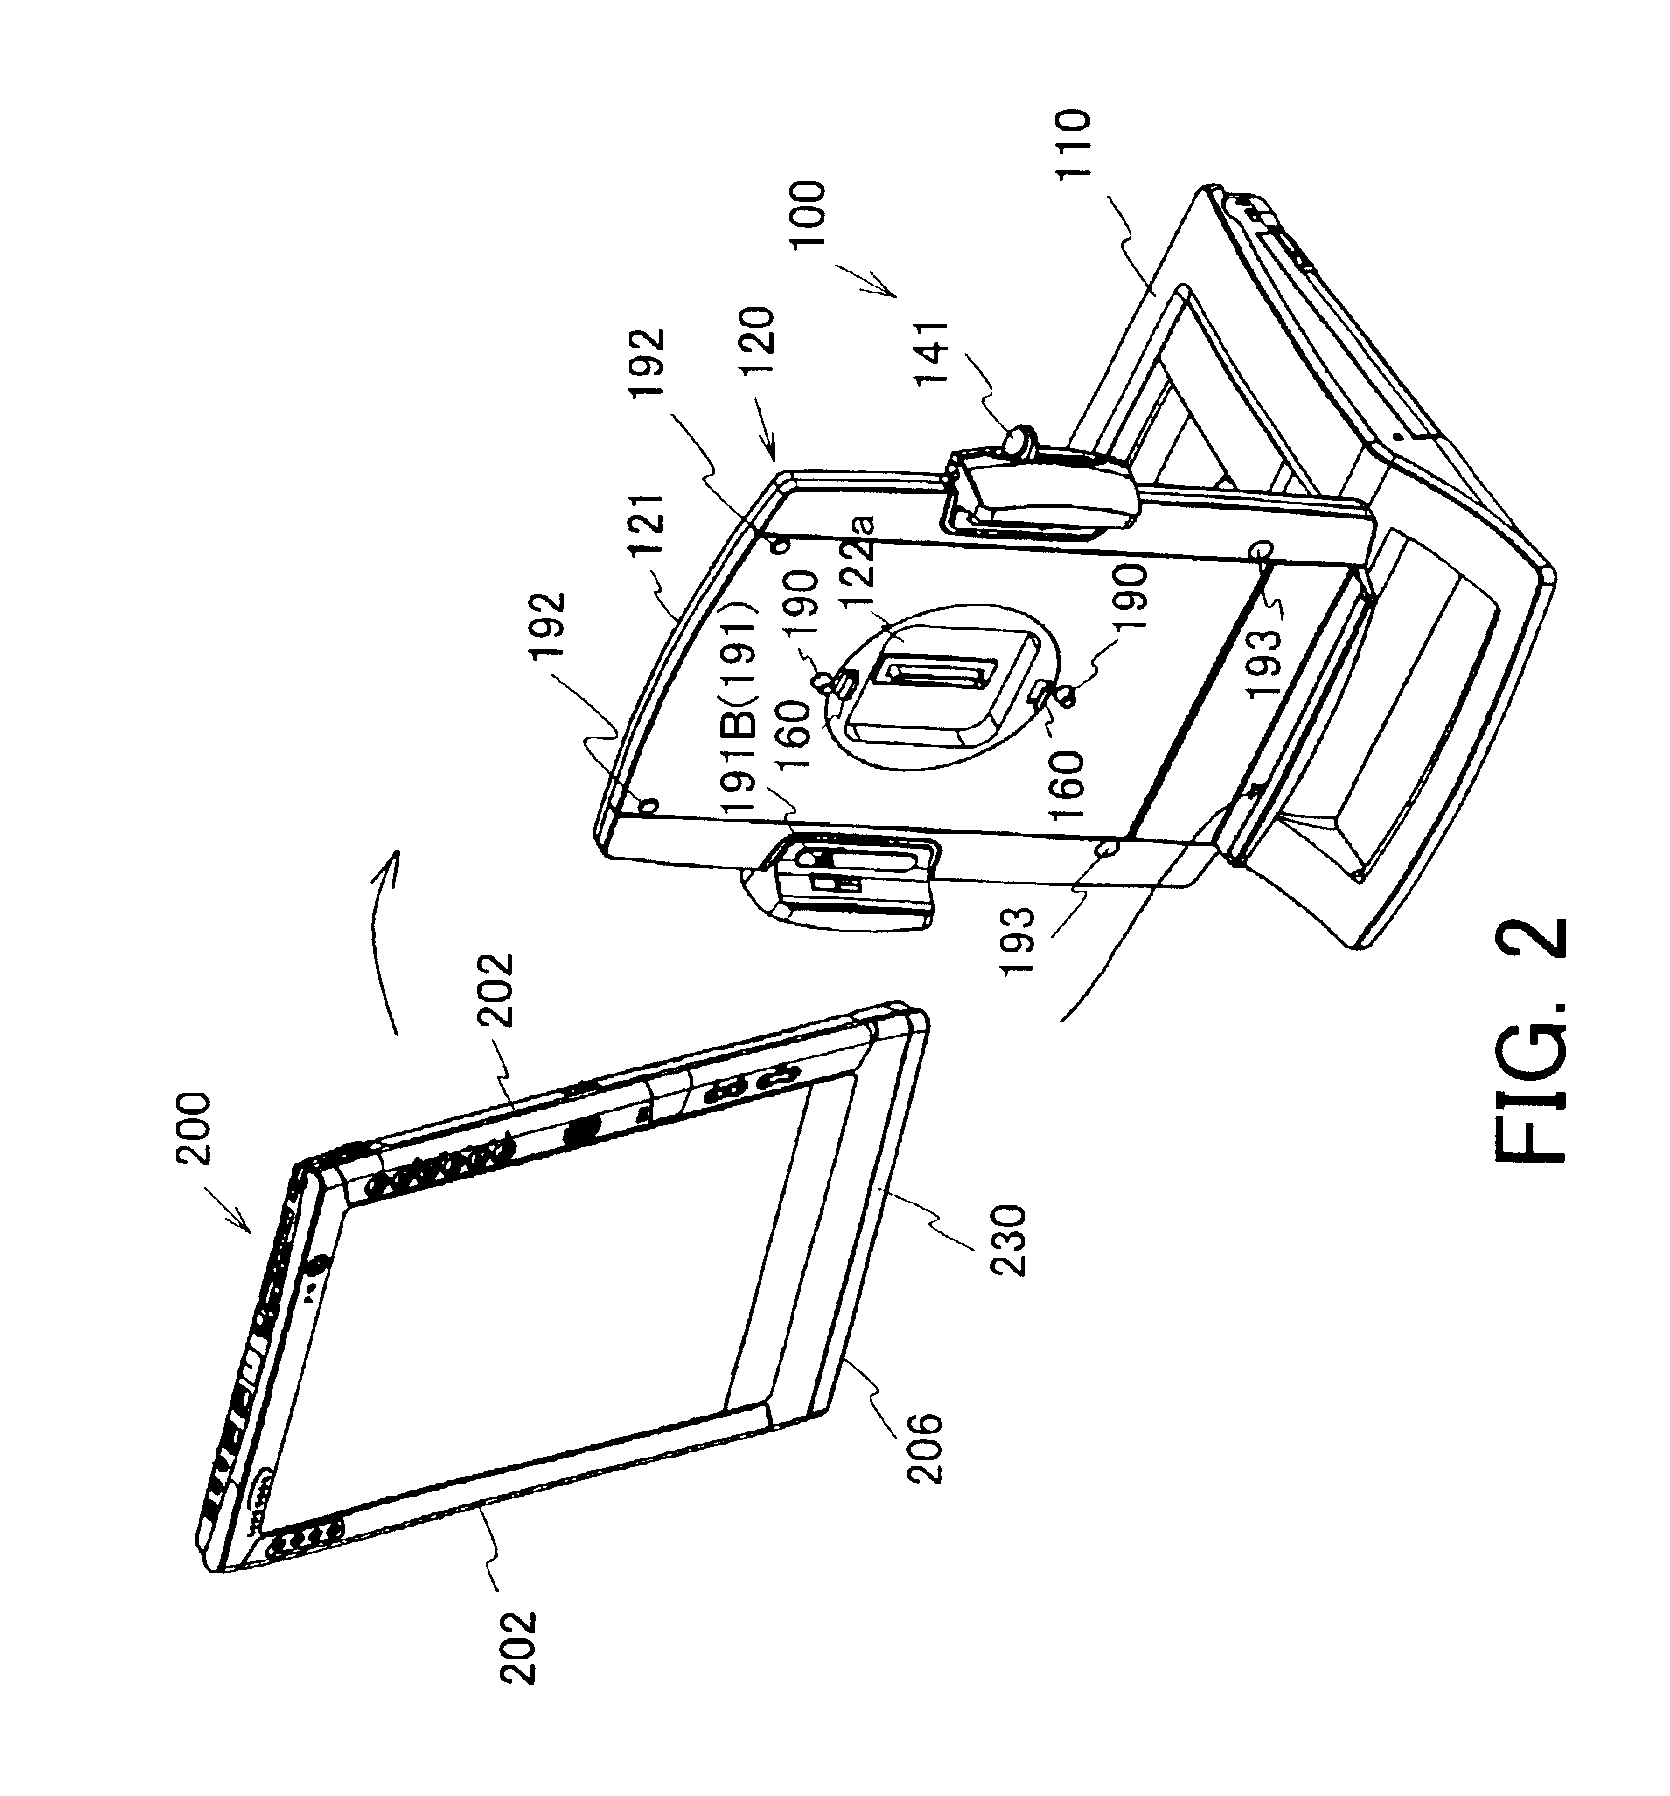 Functional expansion apparatus and method for attaching electronic apparatus to the functional expansion apparatus